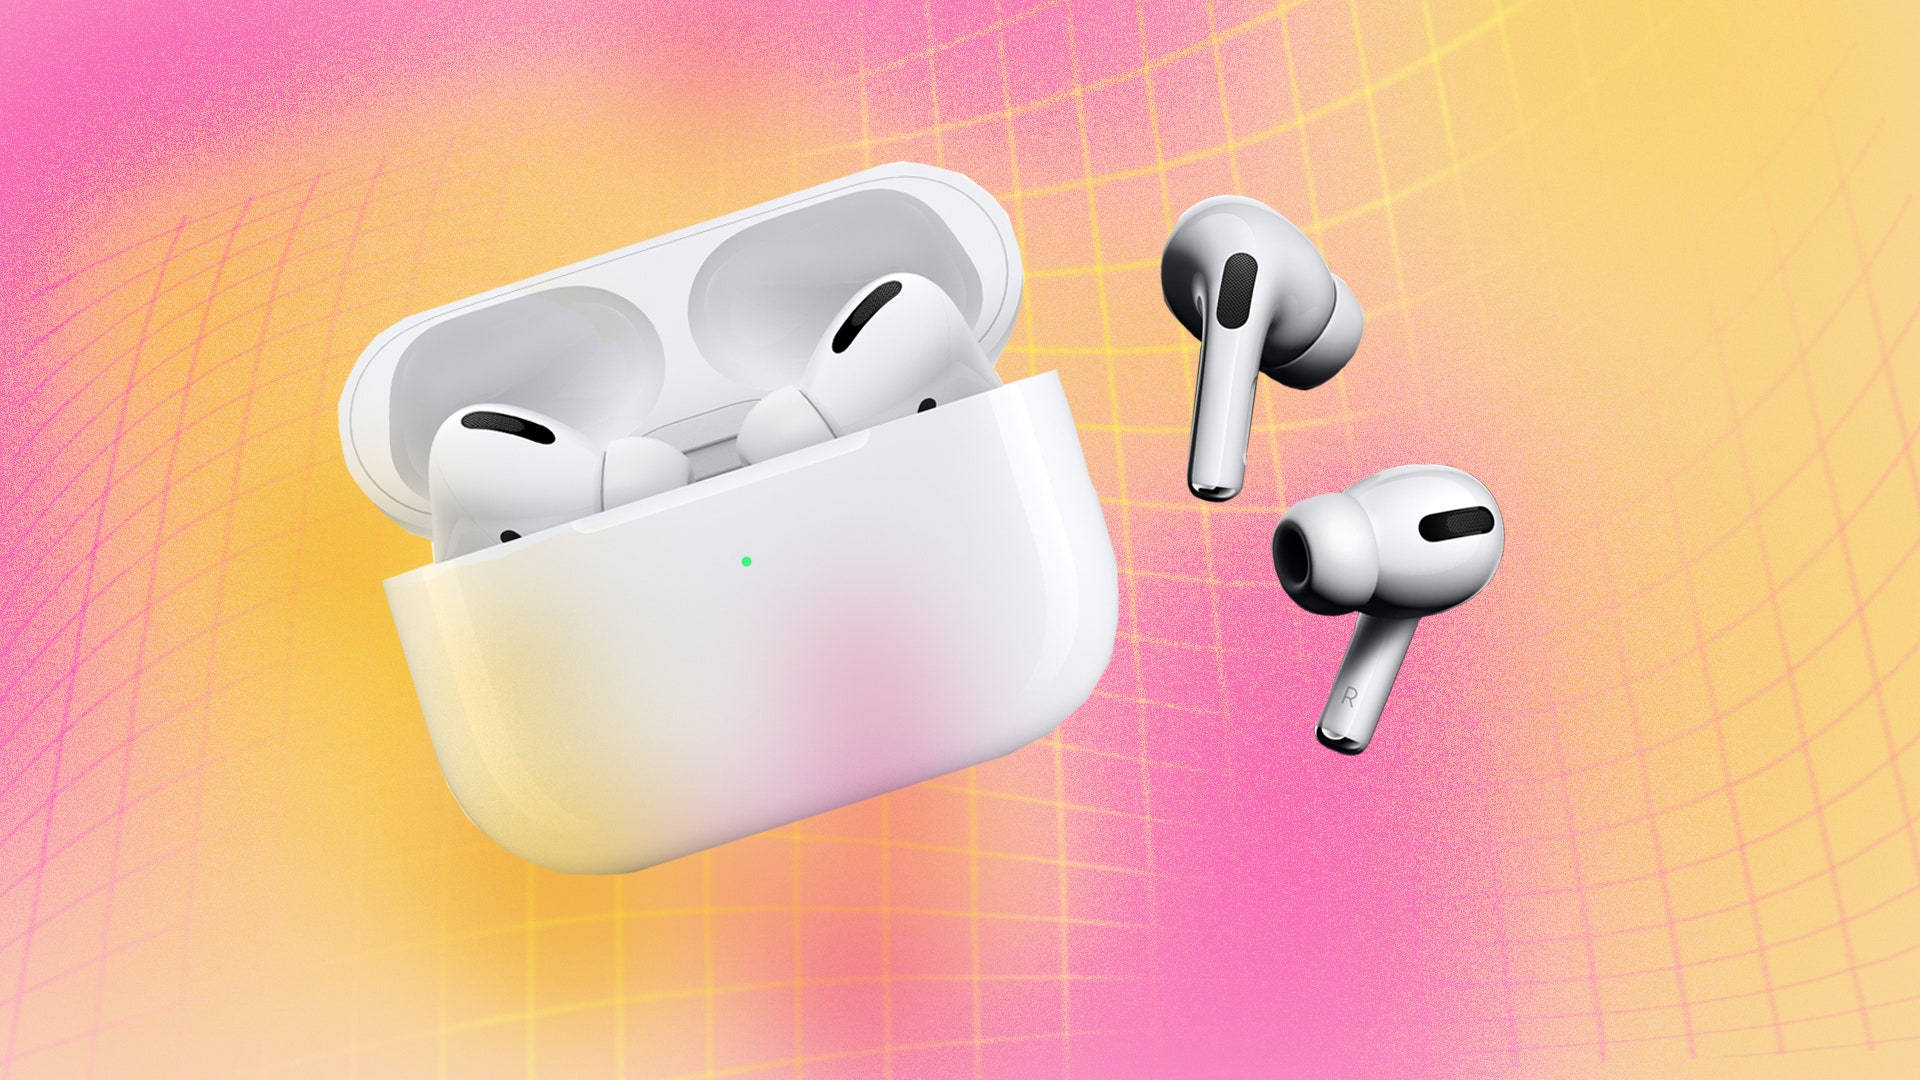 Apple AirPods In Tropical Wallpaper